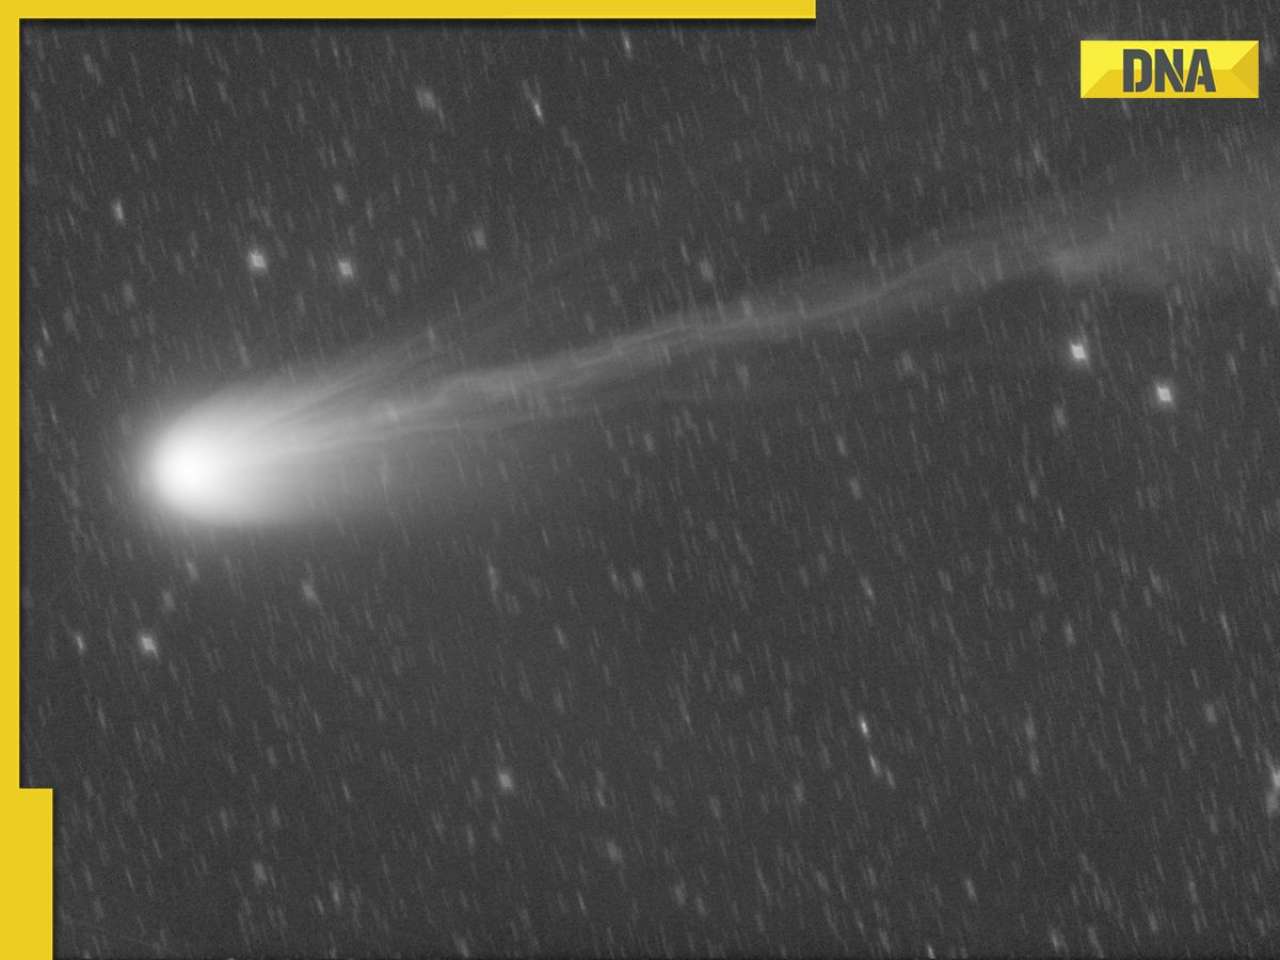 Devil Comet to be nearest to Earth on April 21 after 71 years, has size bigger than world’s tallest mountain